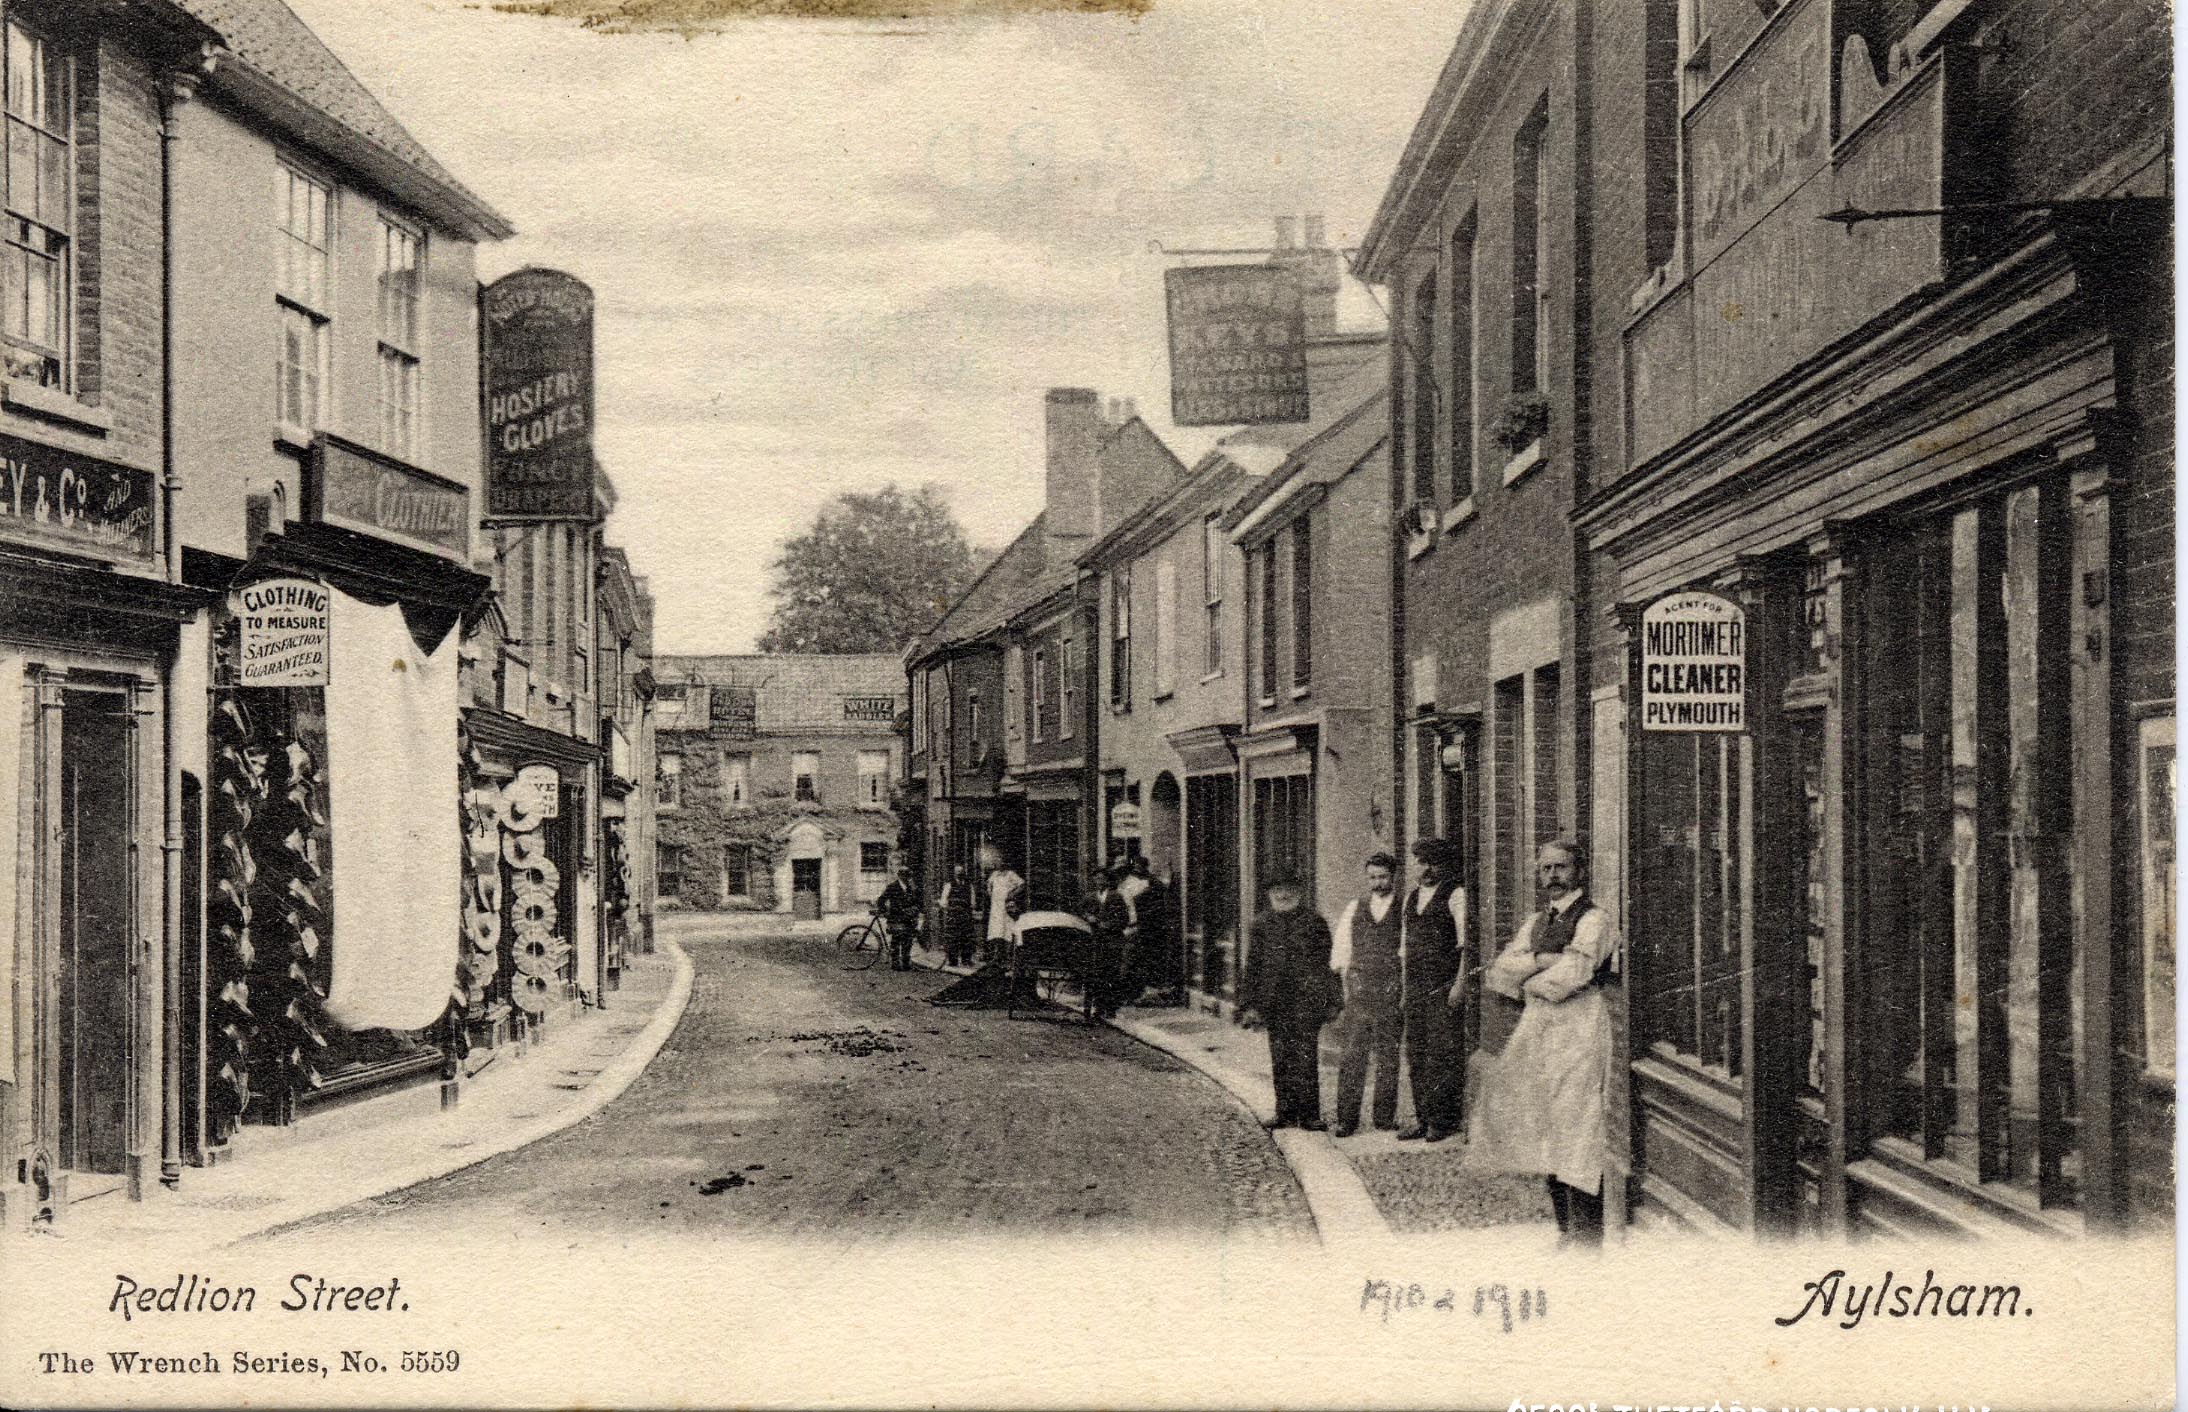 B9-4-5 - image from Town Archive